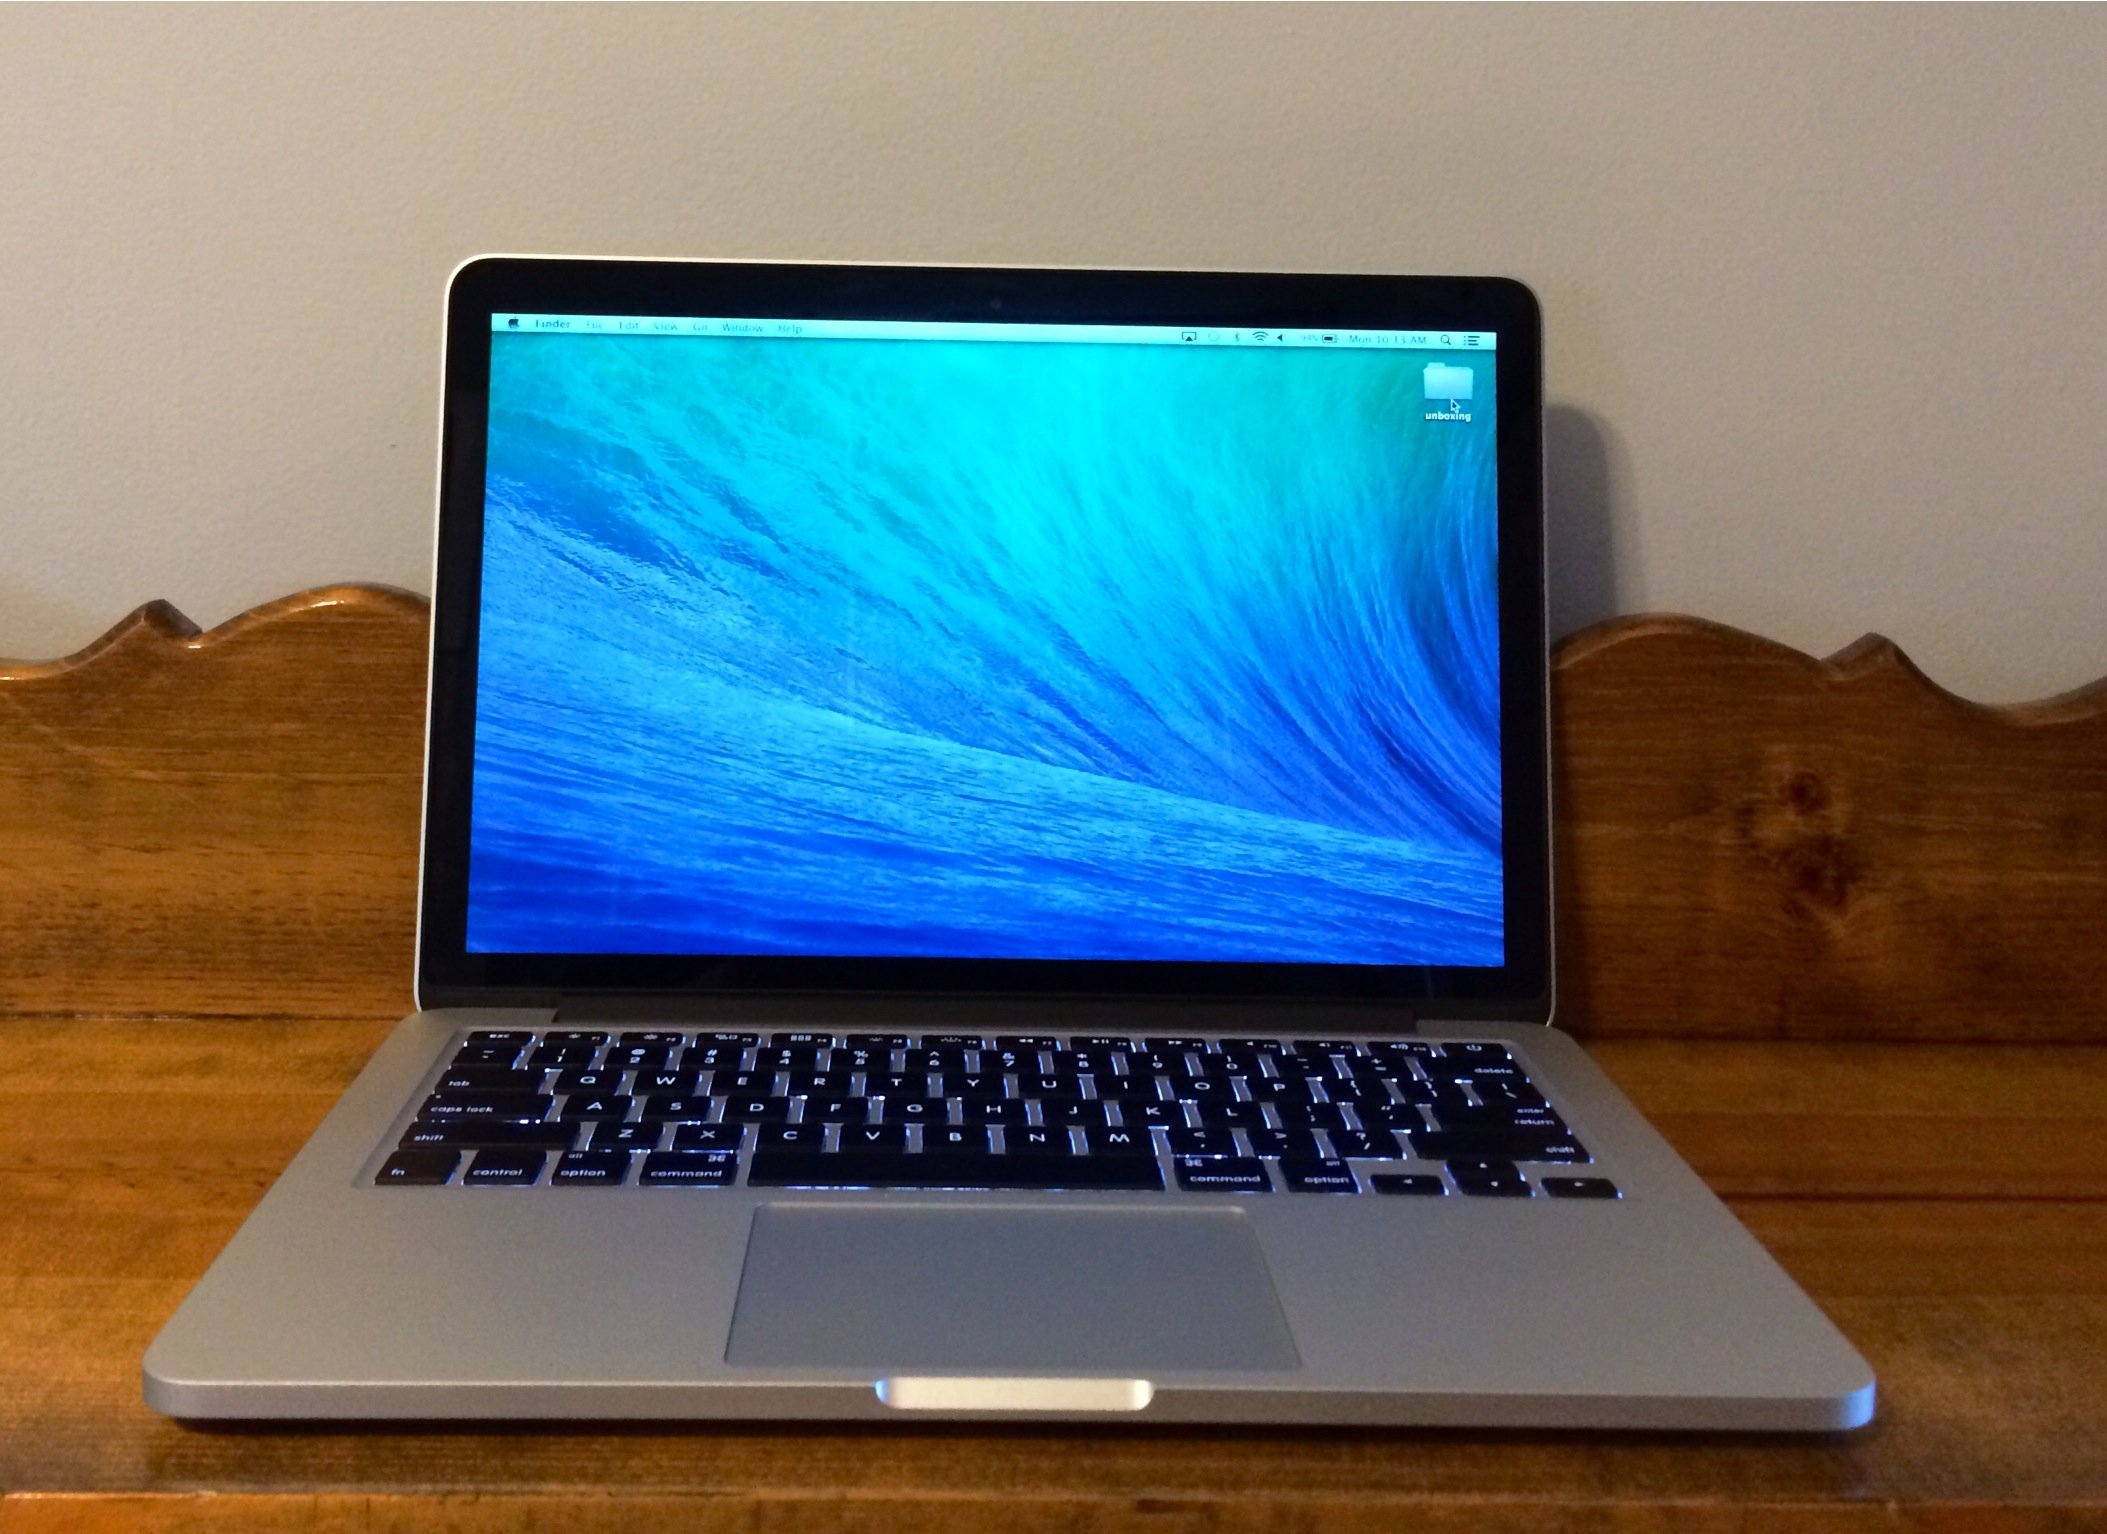 The 13-inch MacBook Pro Retina late 2013 model with Haswell processors is freezing for some users.